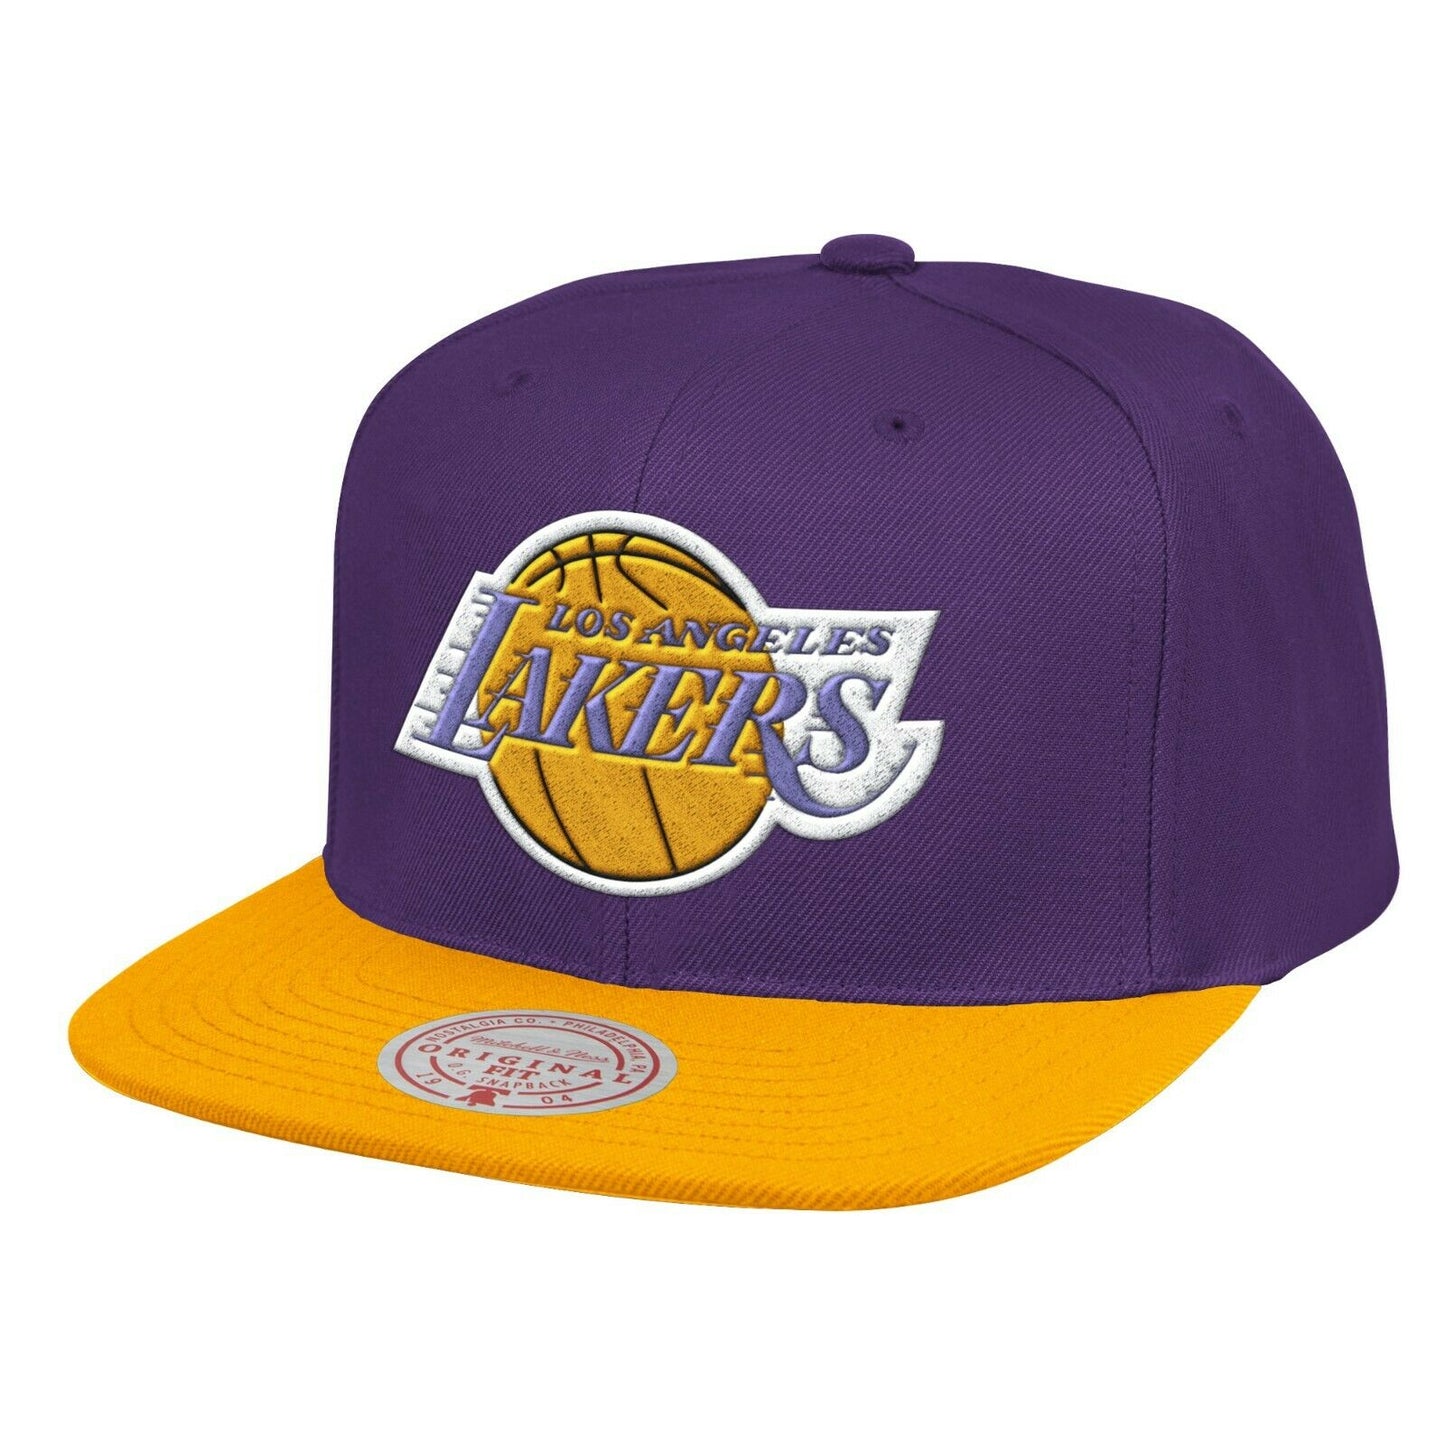 Los Angeles Lakers 1988 NBA Finals Side Patch 2 Tone Purple/ Gold Mitchell & Ness Snapback Hat